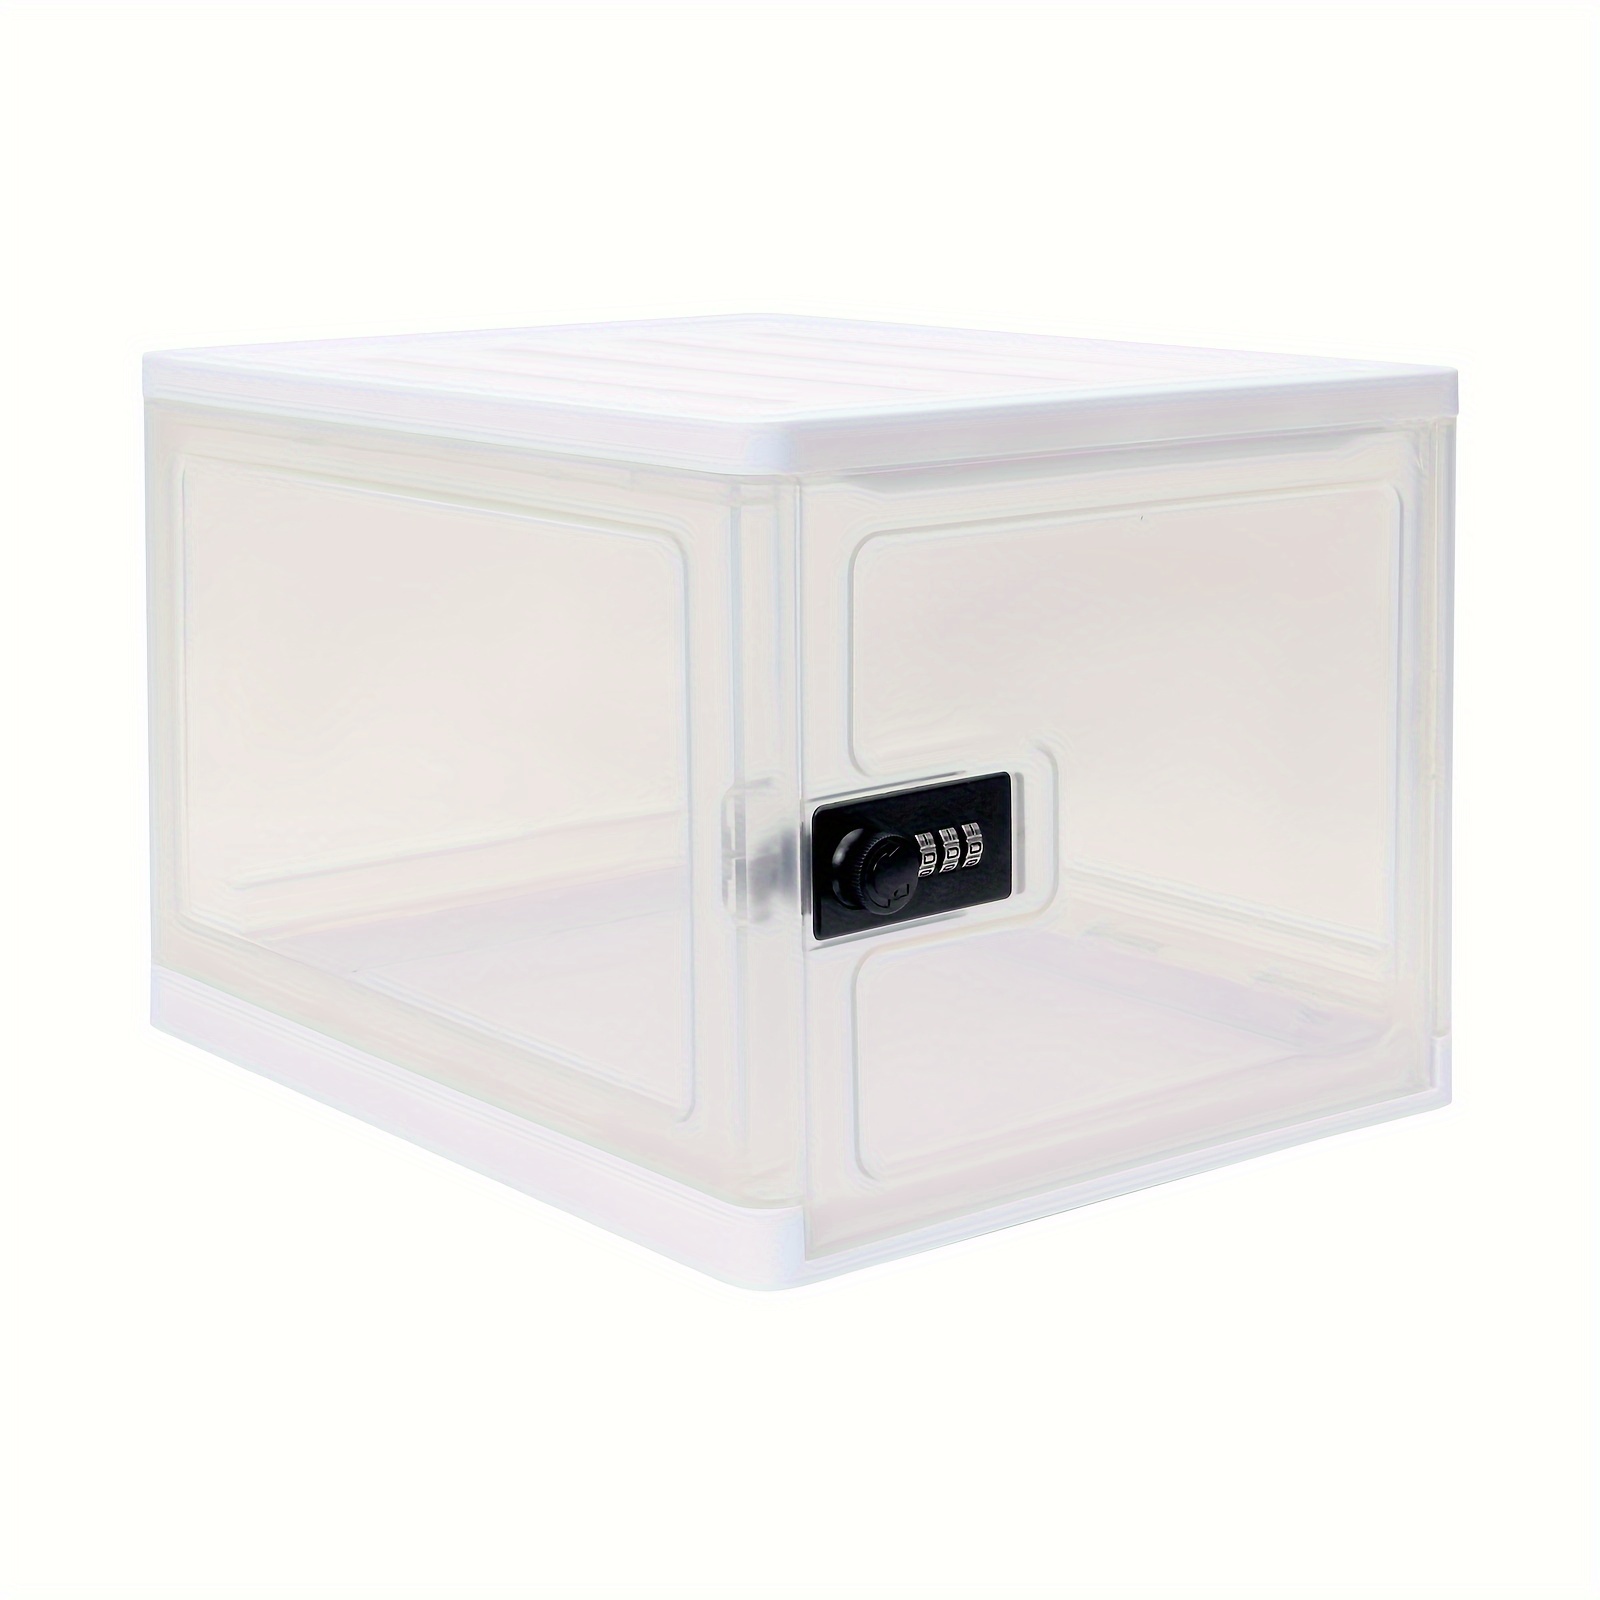 

1pc Large Locked Storage Box, Clear Foldable Storage Box With Lock For Food Equipment & Home Safety, Medicine Lockbox For Secure Medication, Tablet & Phone Security